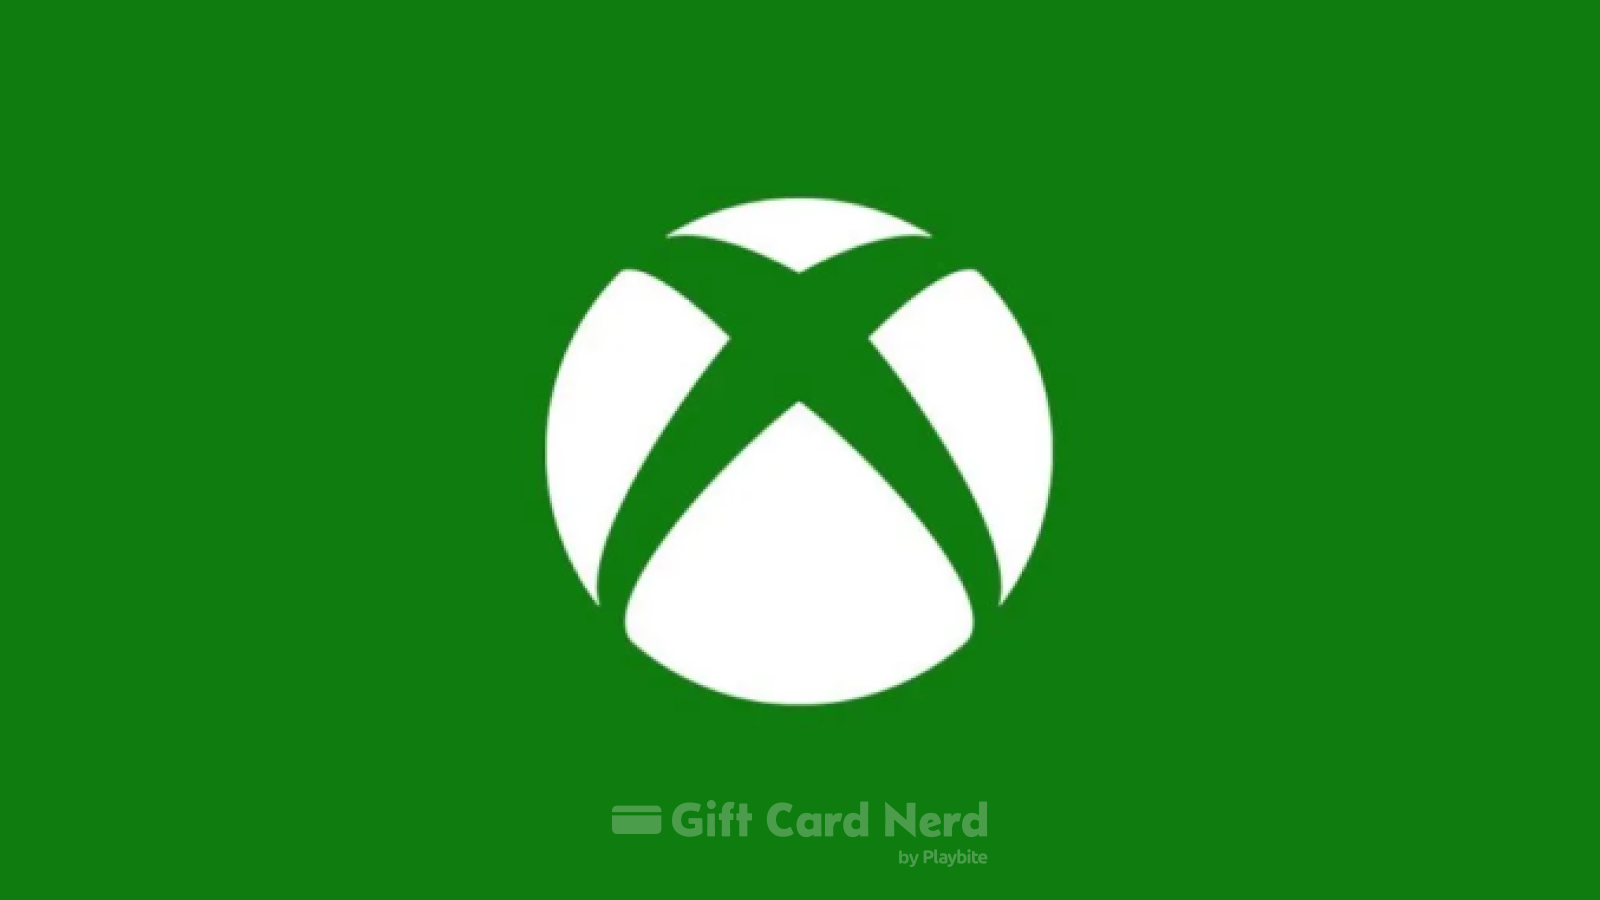 Can You Use an Xbox Gift Card on Roblox?